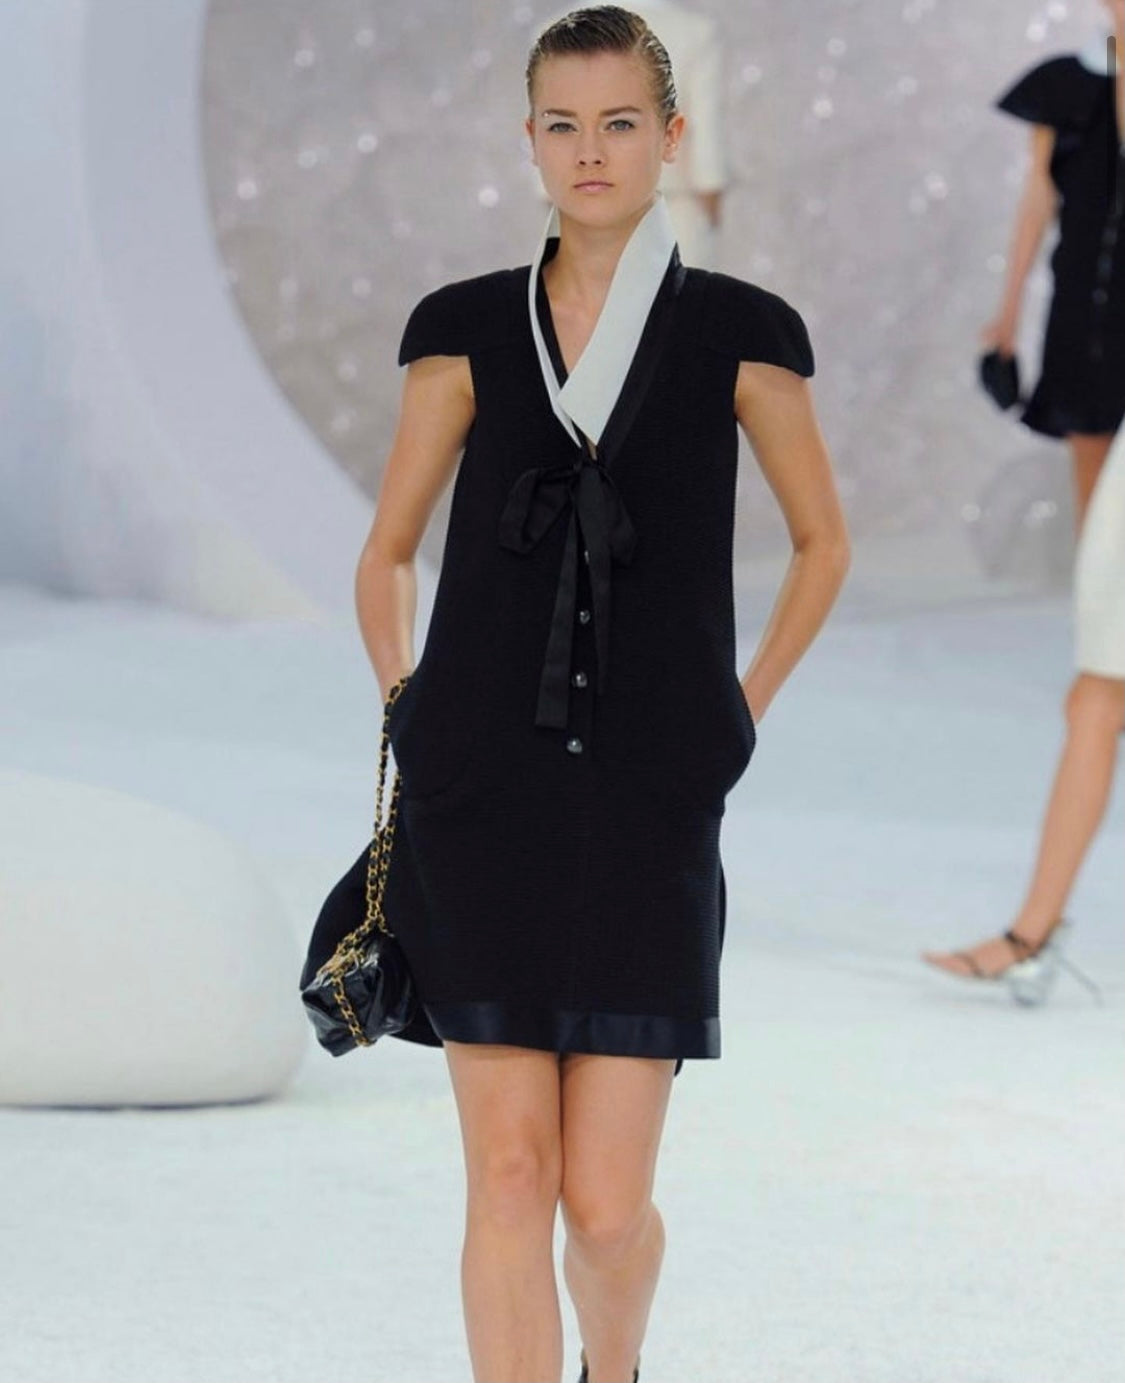 Chanel Fall 2015 Runway Pictures  Fashion, Couture fashion, Chanel haute  couture